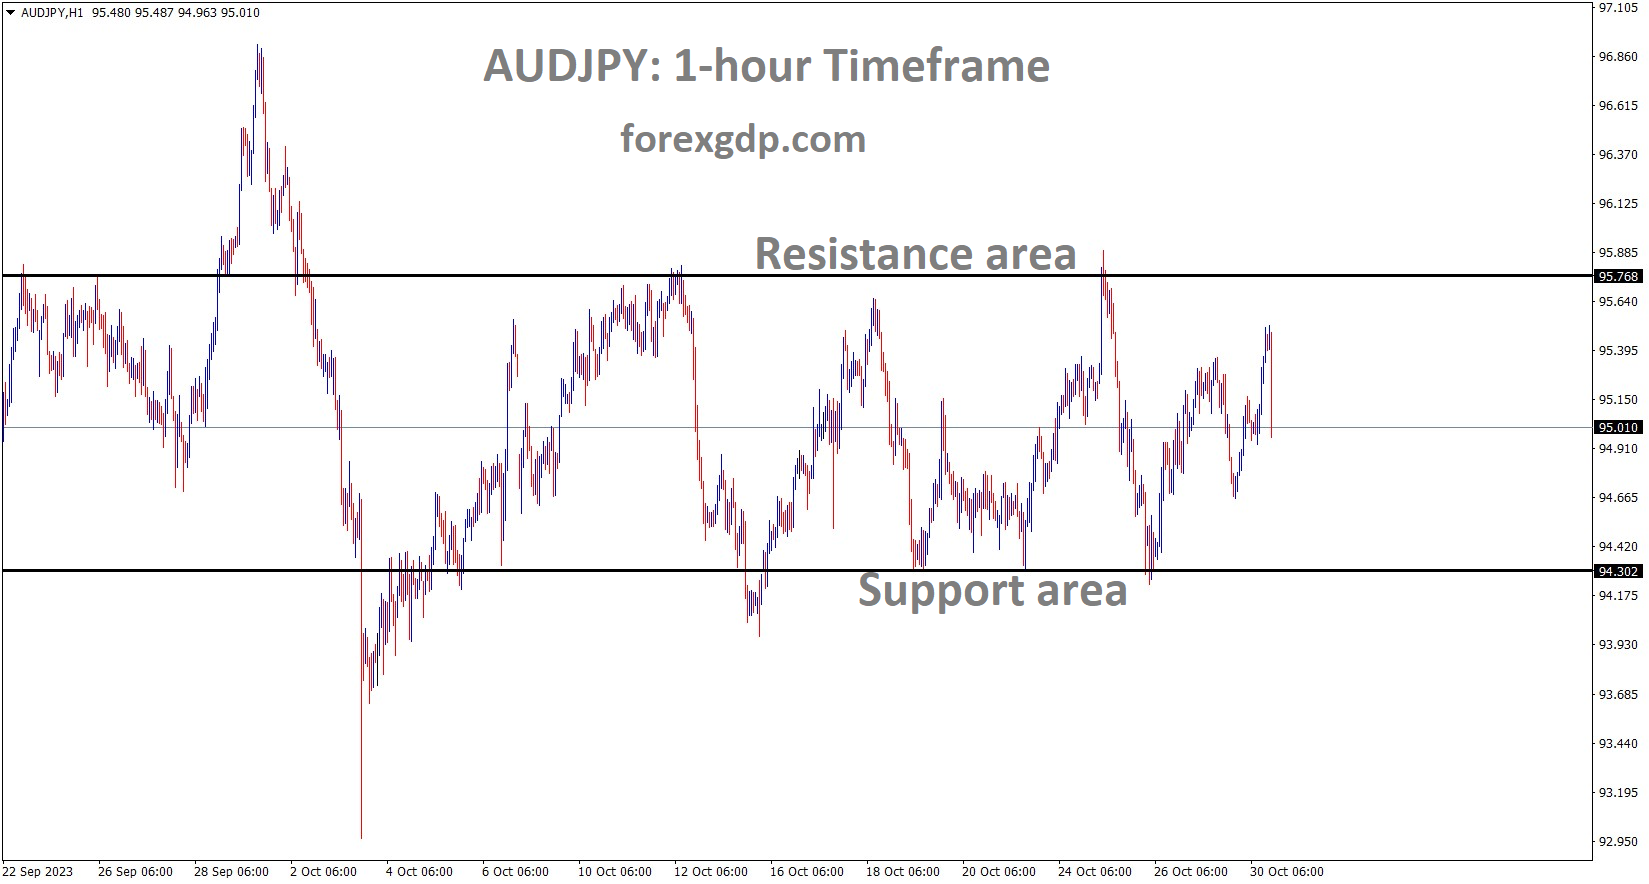 AUDJPY is moving in the Box pattern and the market has fallen from the resistance area of the pattern